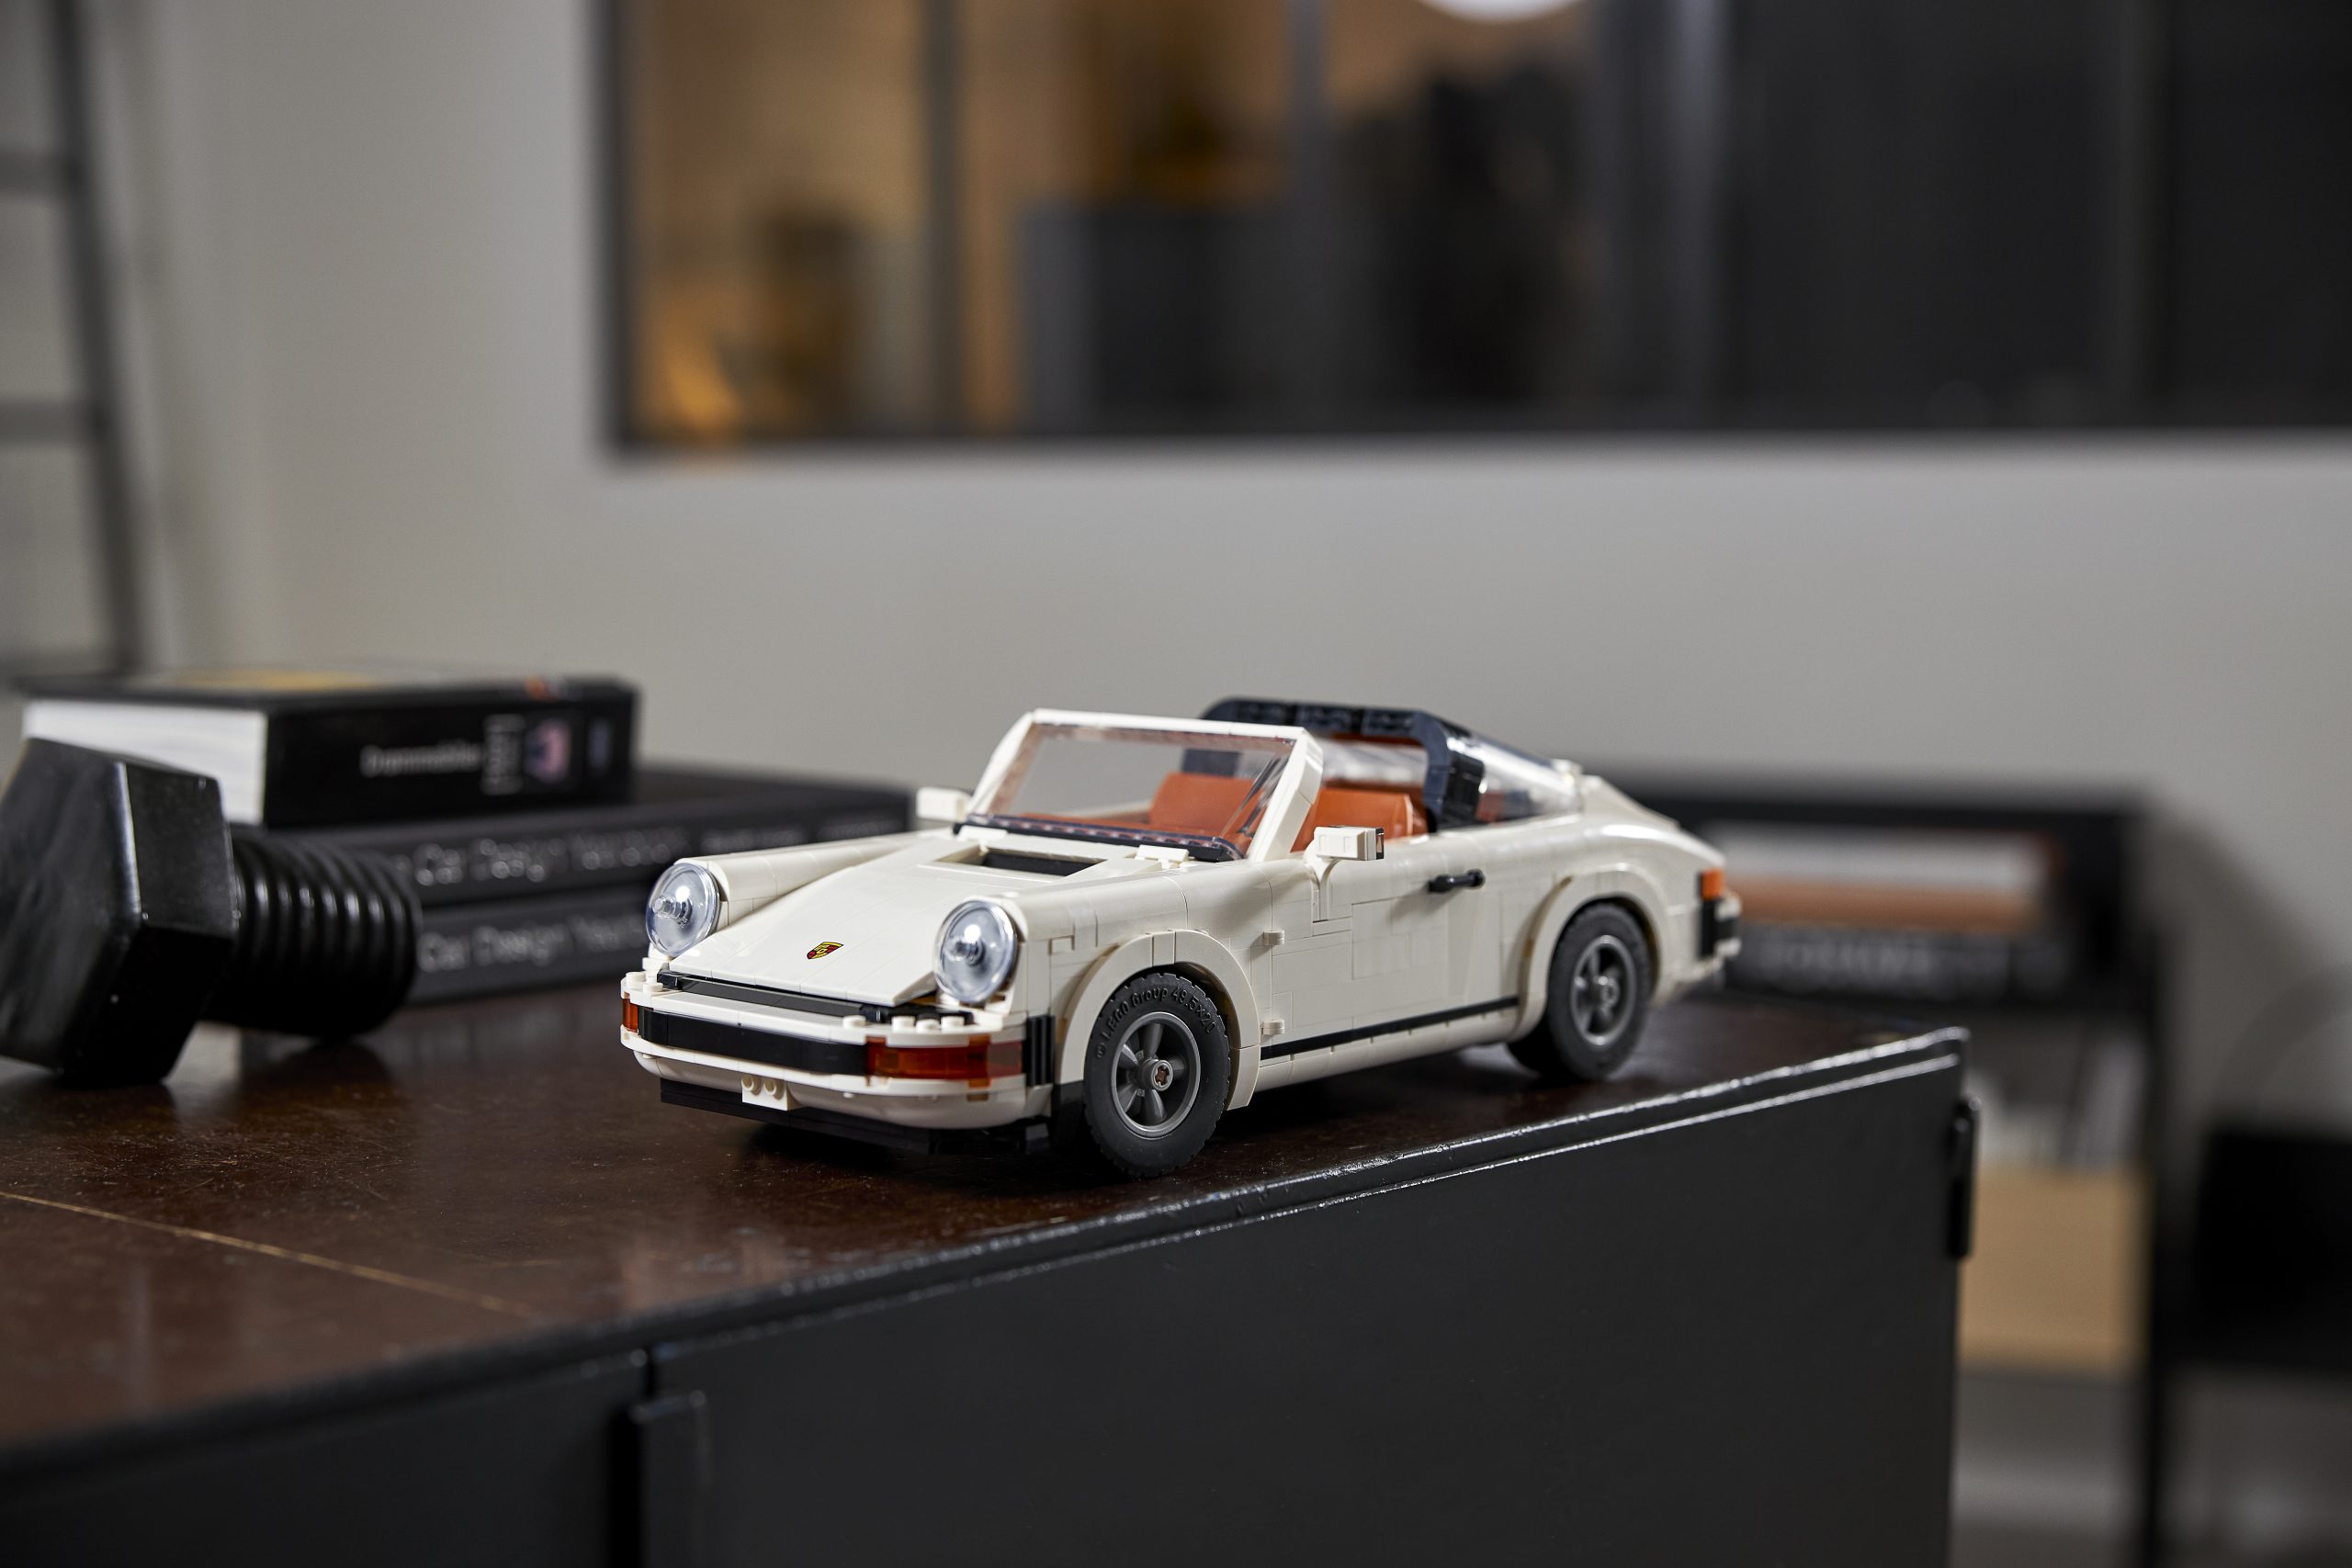 Lego’s New Porsche 911 Set Gives You Targa and Turbo in One Box